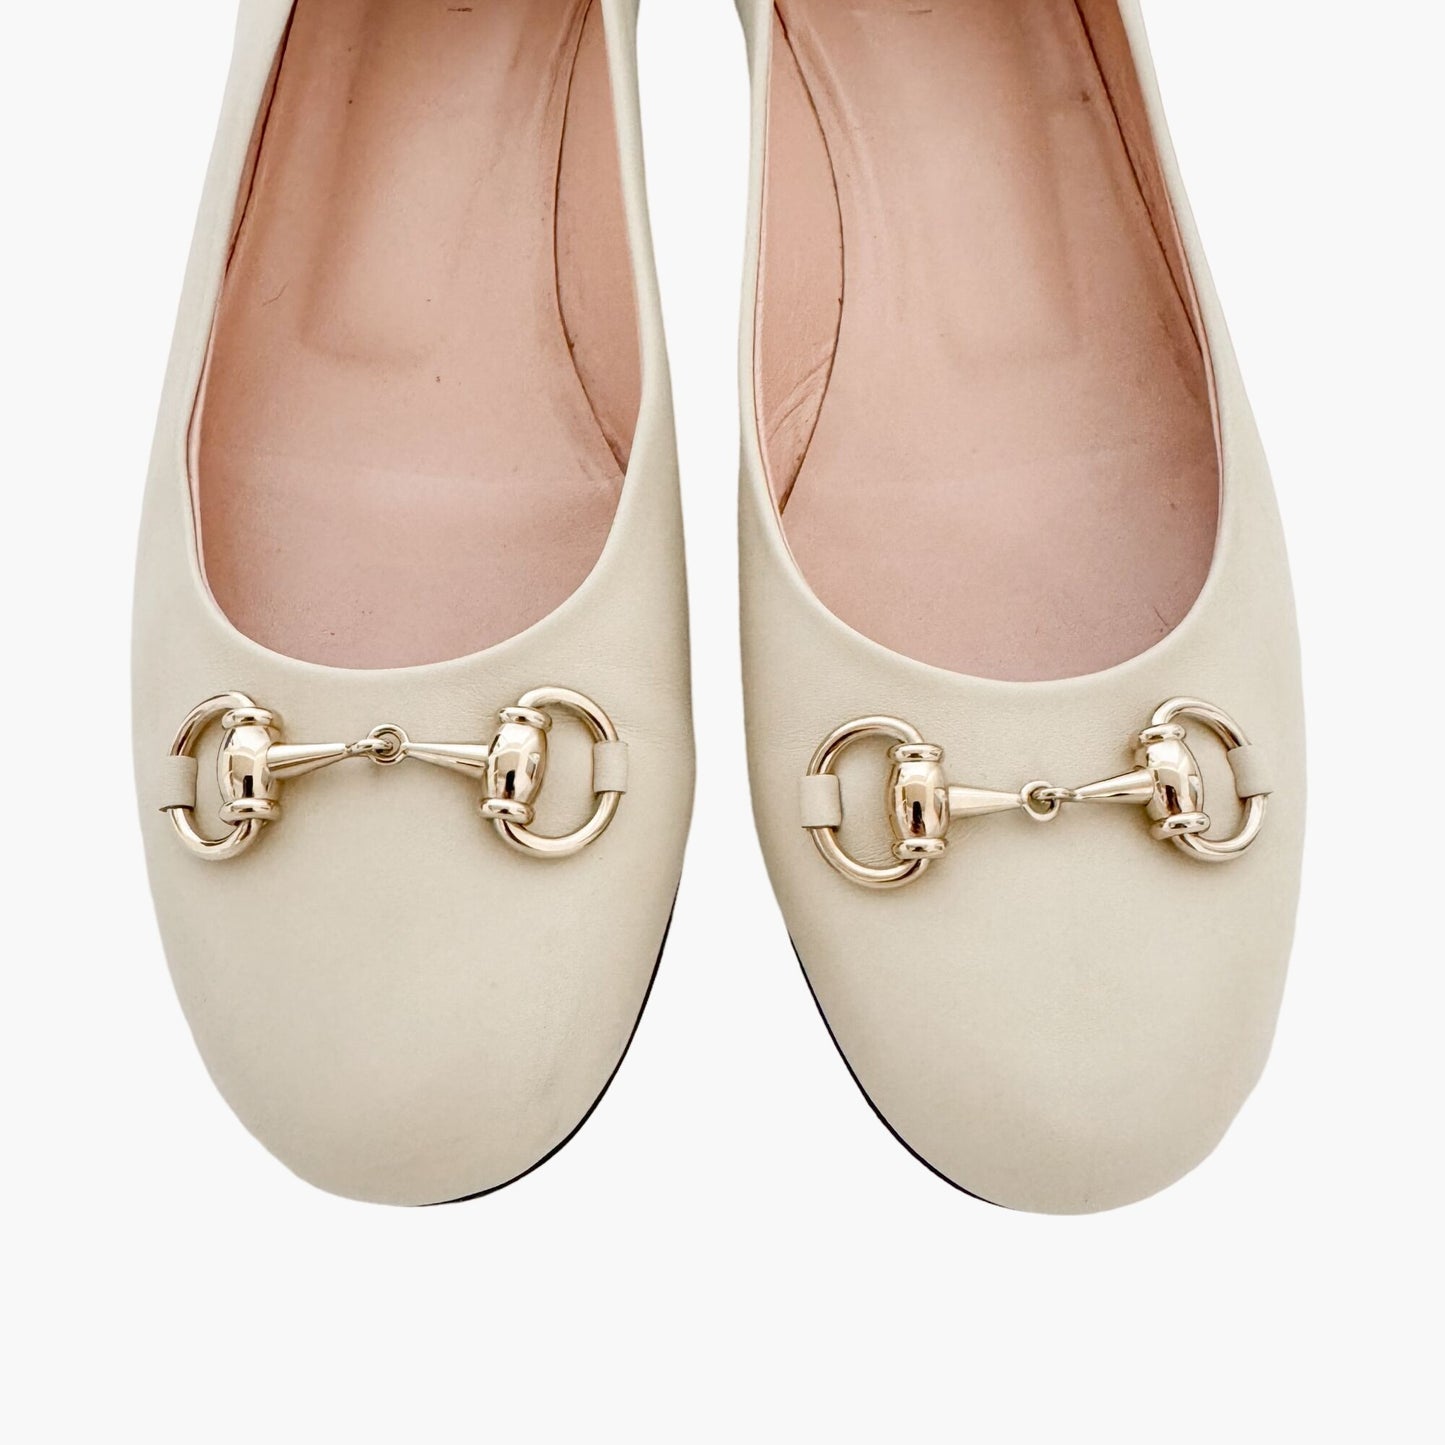 Gucci Horsebit Ballet Flats in White Leather Size 41